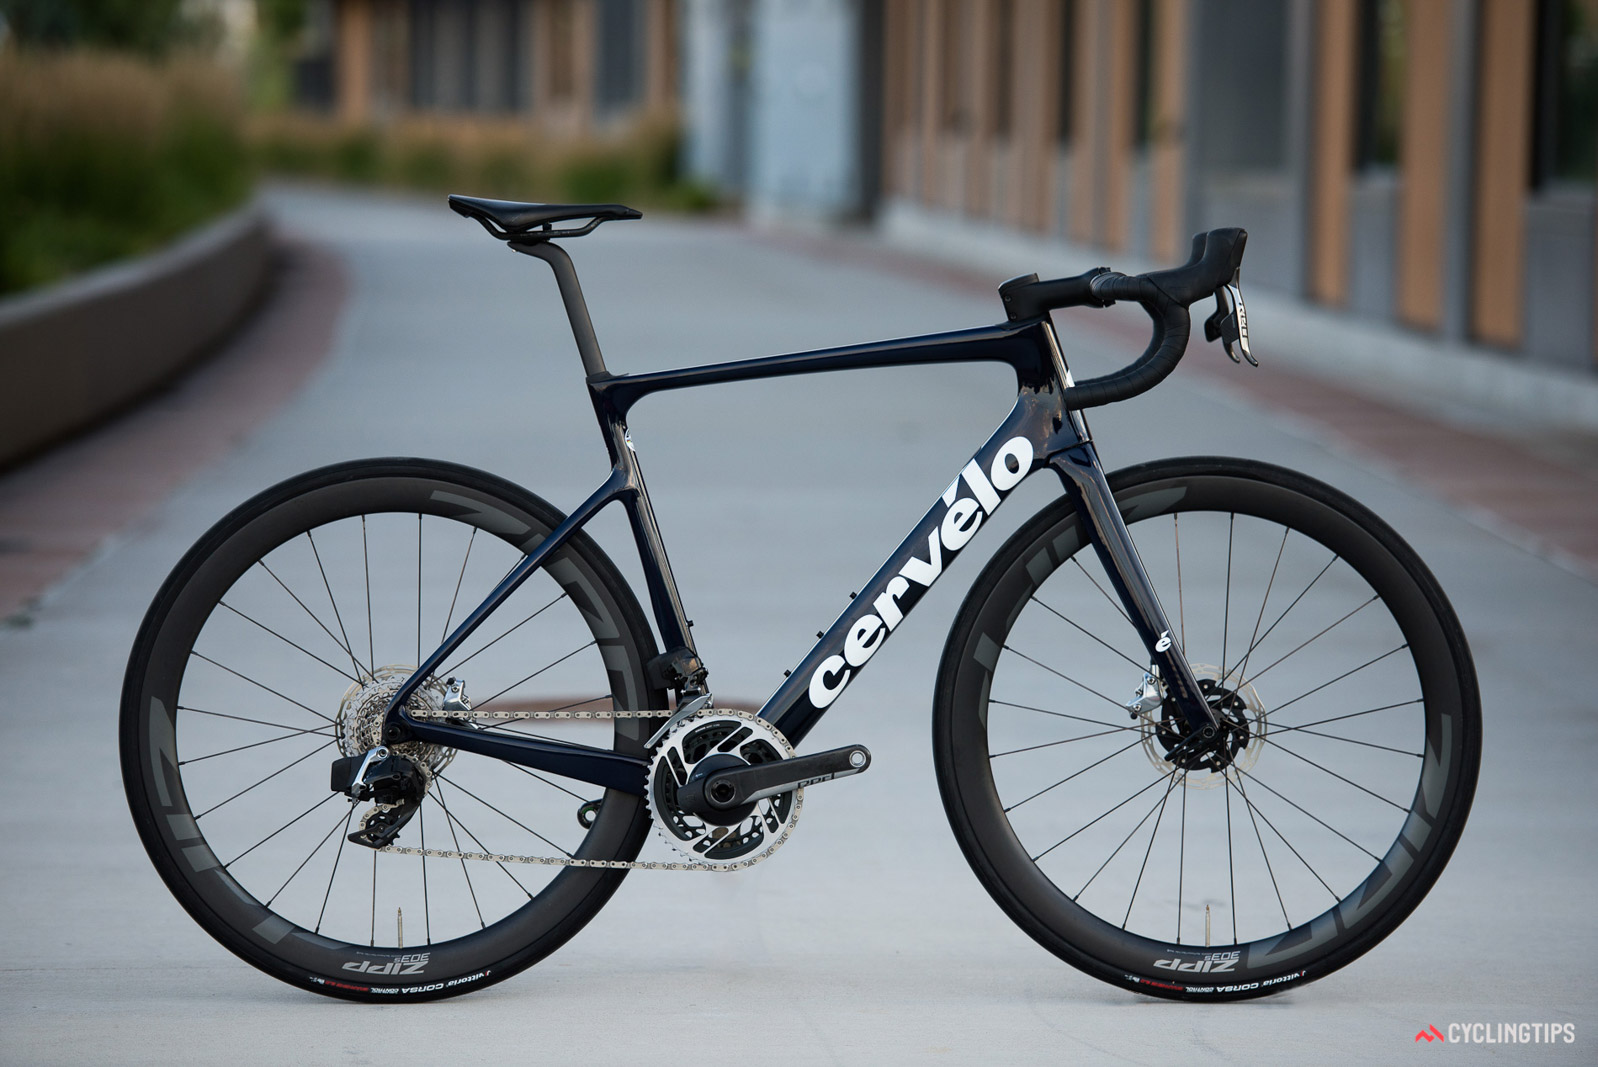 Cervelo Caledonia 5 first-ride review: Where road bikes are headed